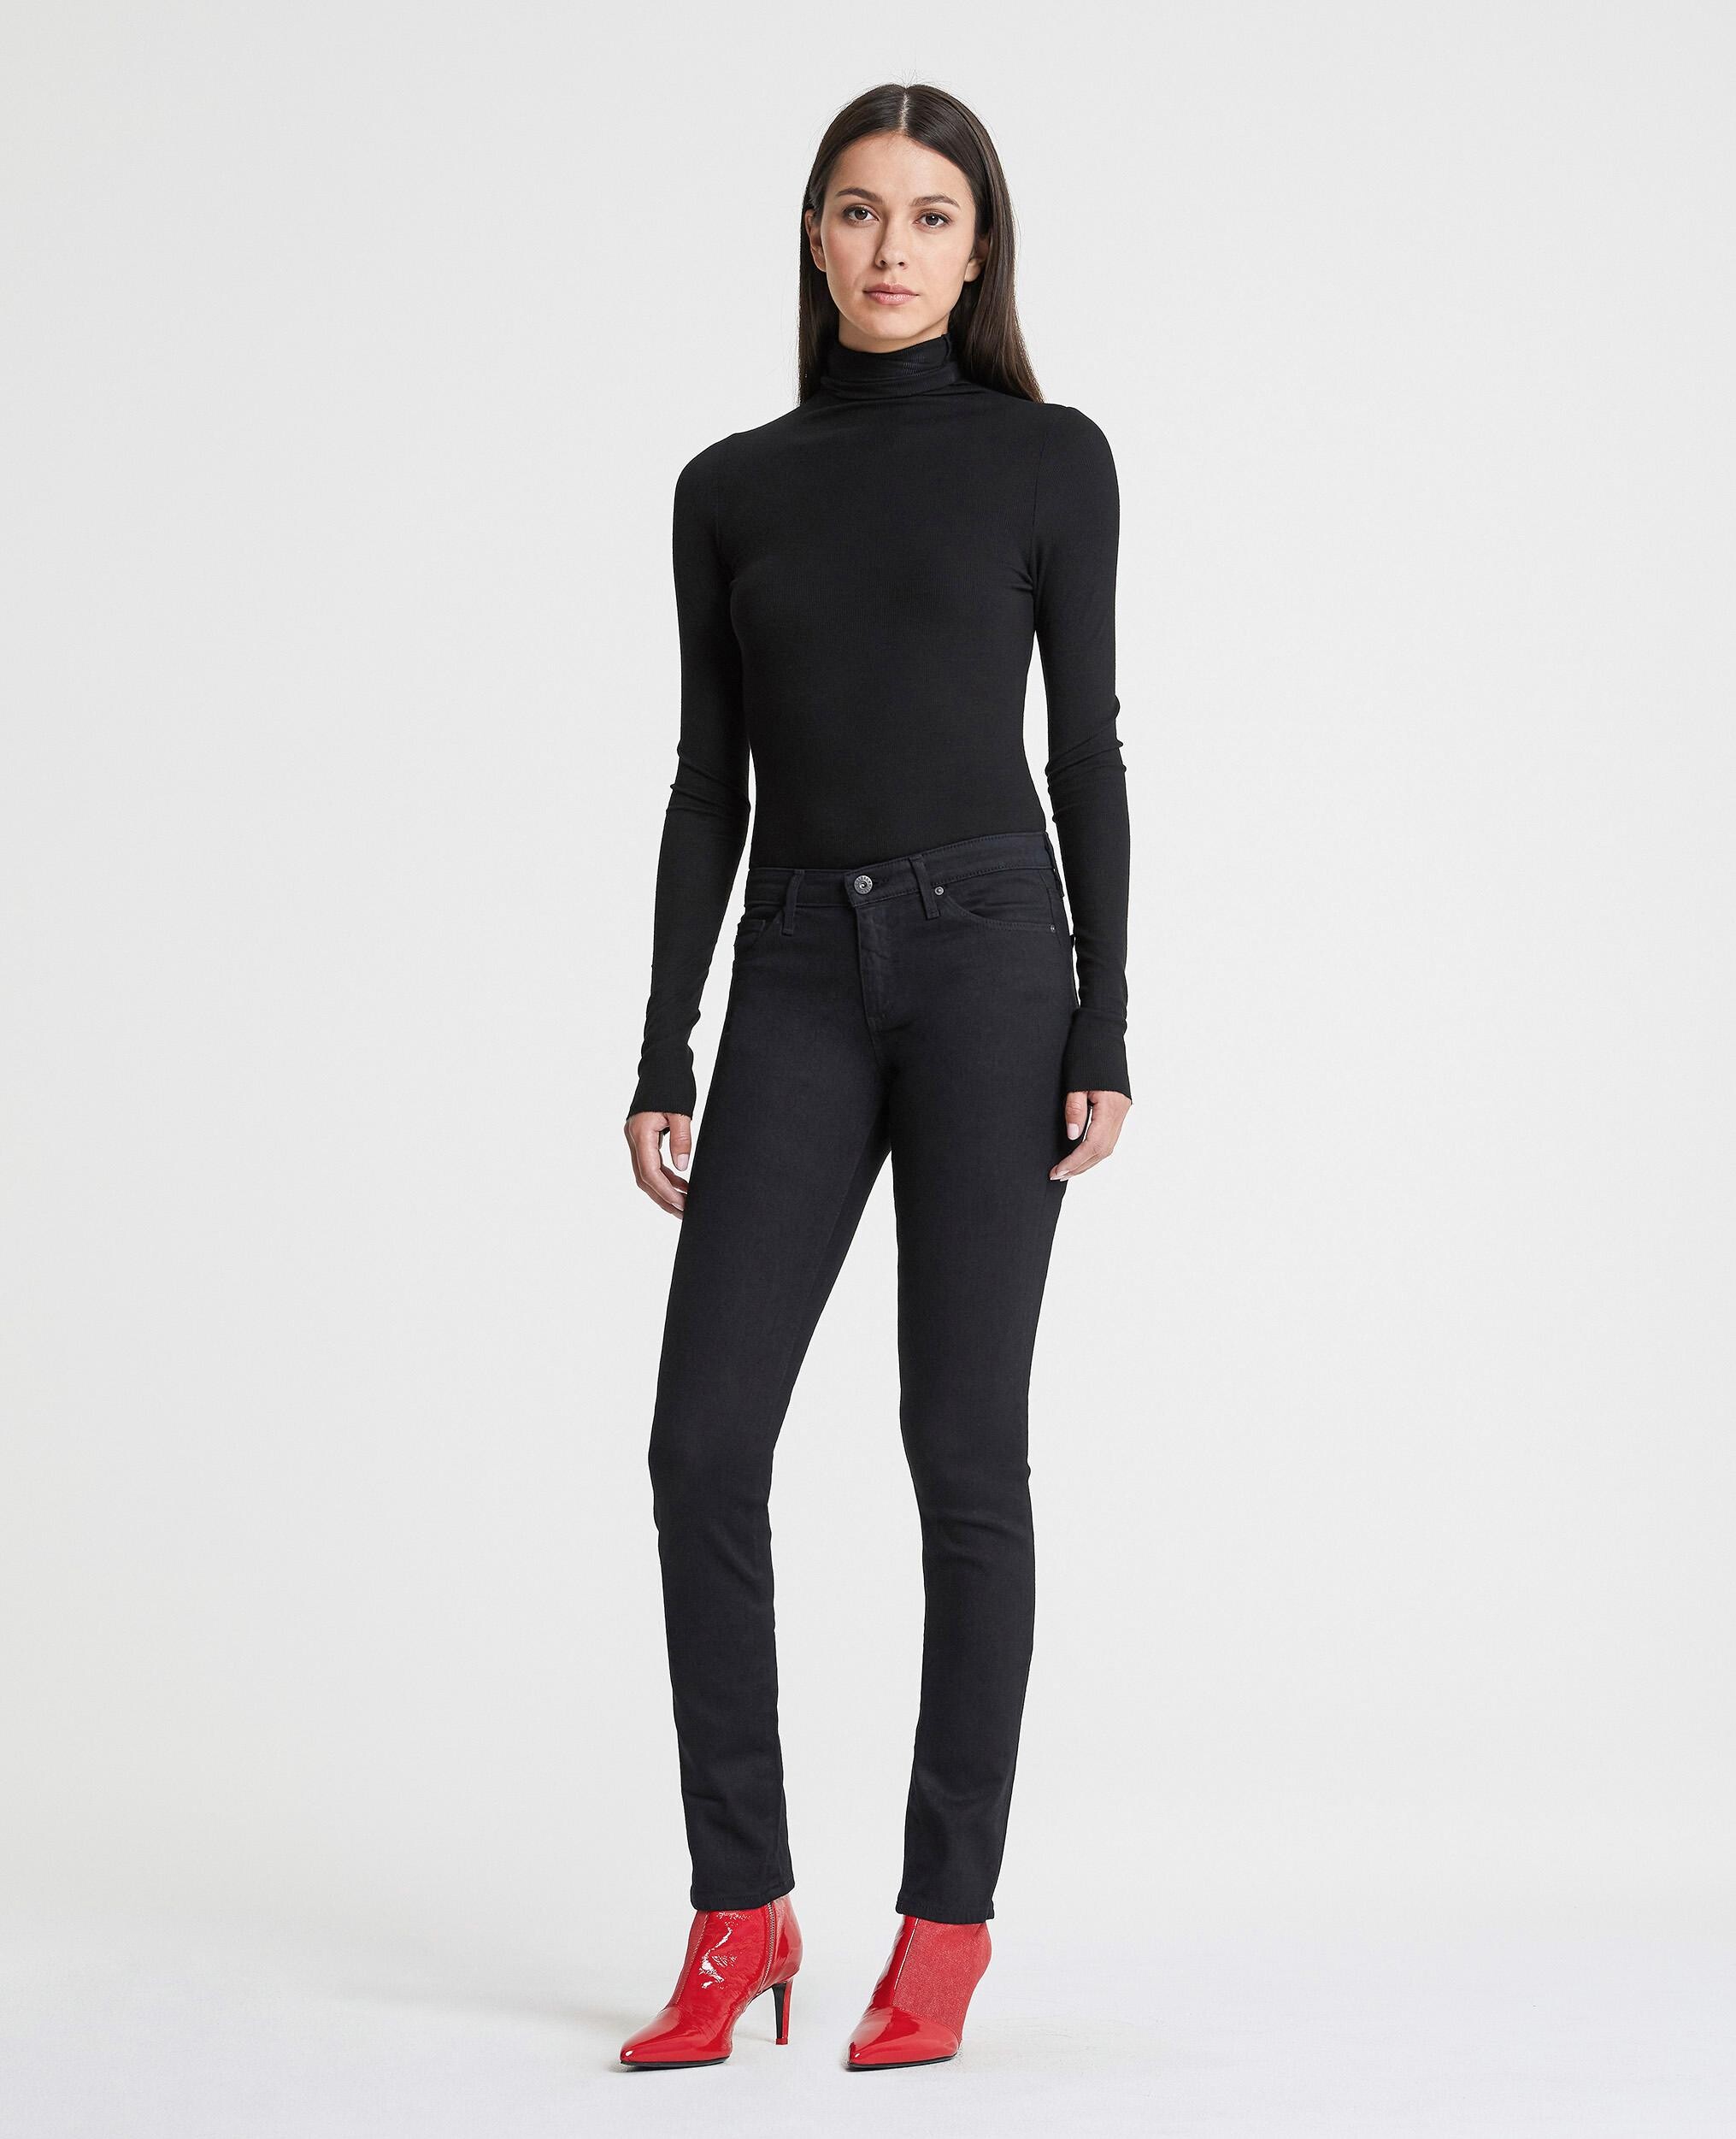 HARPER JEANS (OVERDYE BLACK)- ADRIANO GOLDSCHMIED AW19 Boxing Day Sale